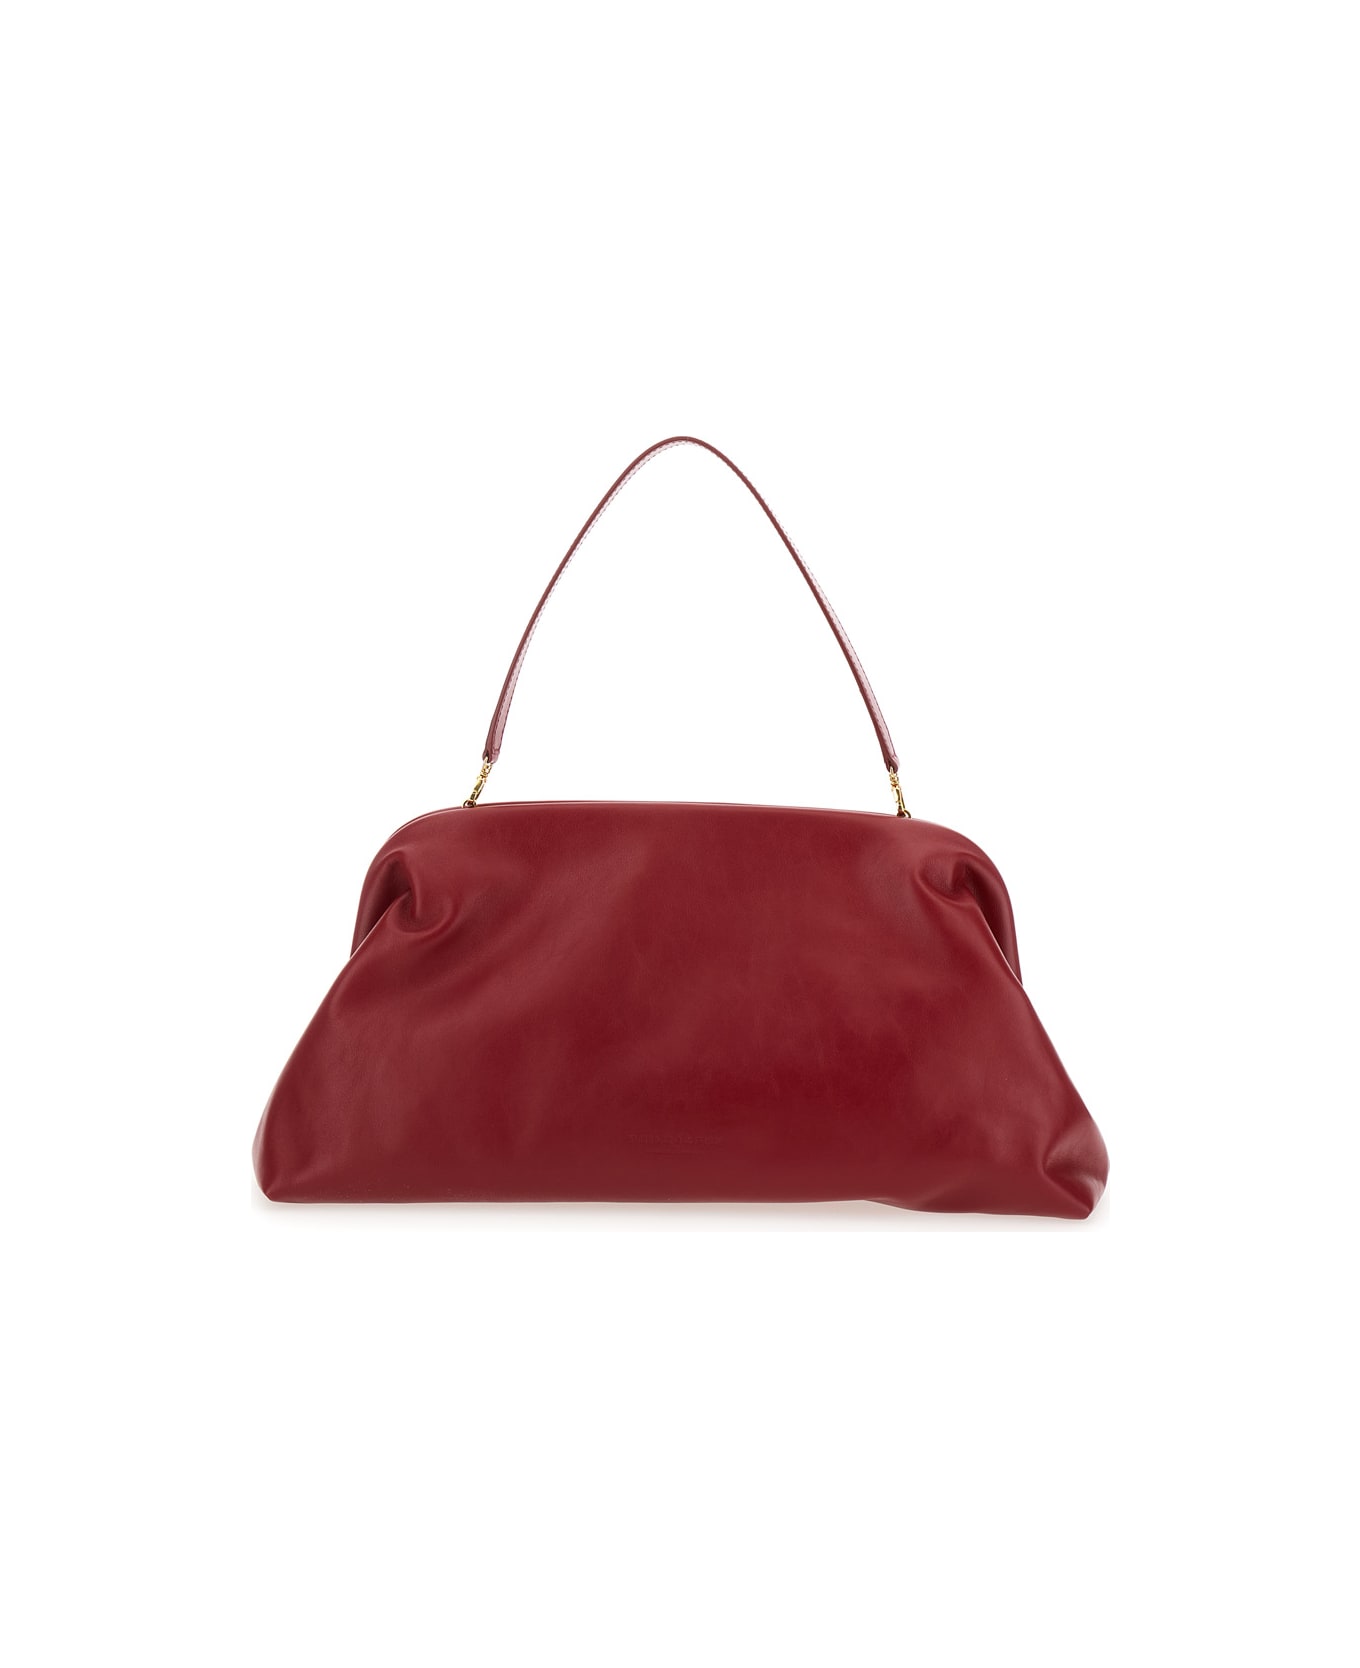 Philosophy di Lorenzo Serafini 'lauren' Bordeaux Maxi Clutch With Magnetic Closure In Leather Woman - Red トートバッグ